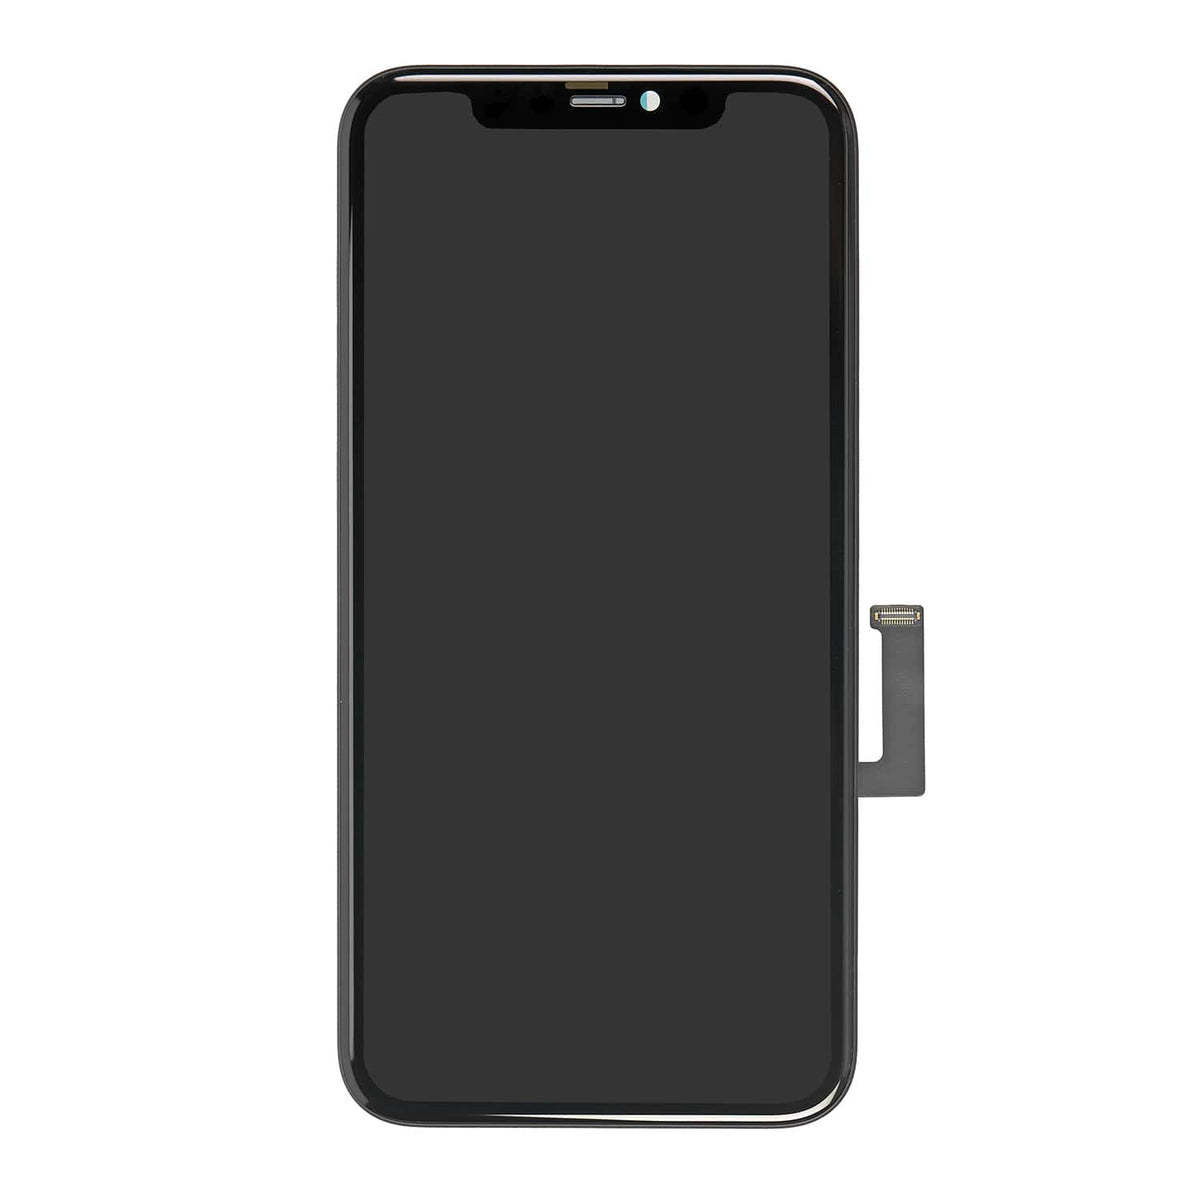 LCD SCREEN DIGITIZER ASSEMBLY FOR IPHONE 11- BLACK